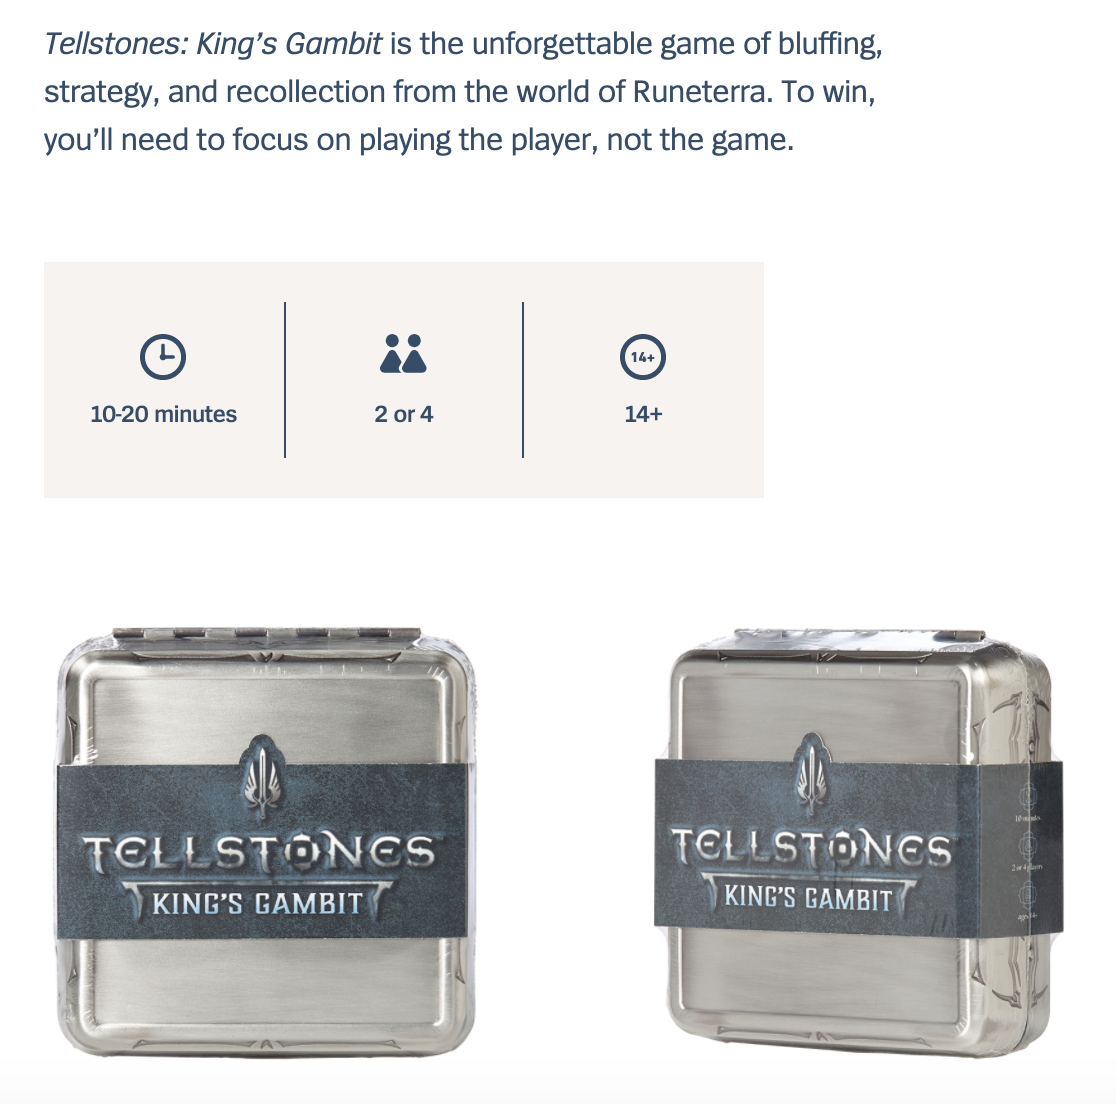 Tellstones: King's Gambit is a new tabletop League of Legends